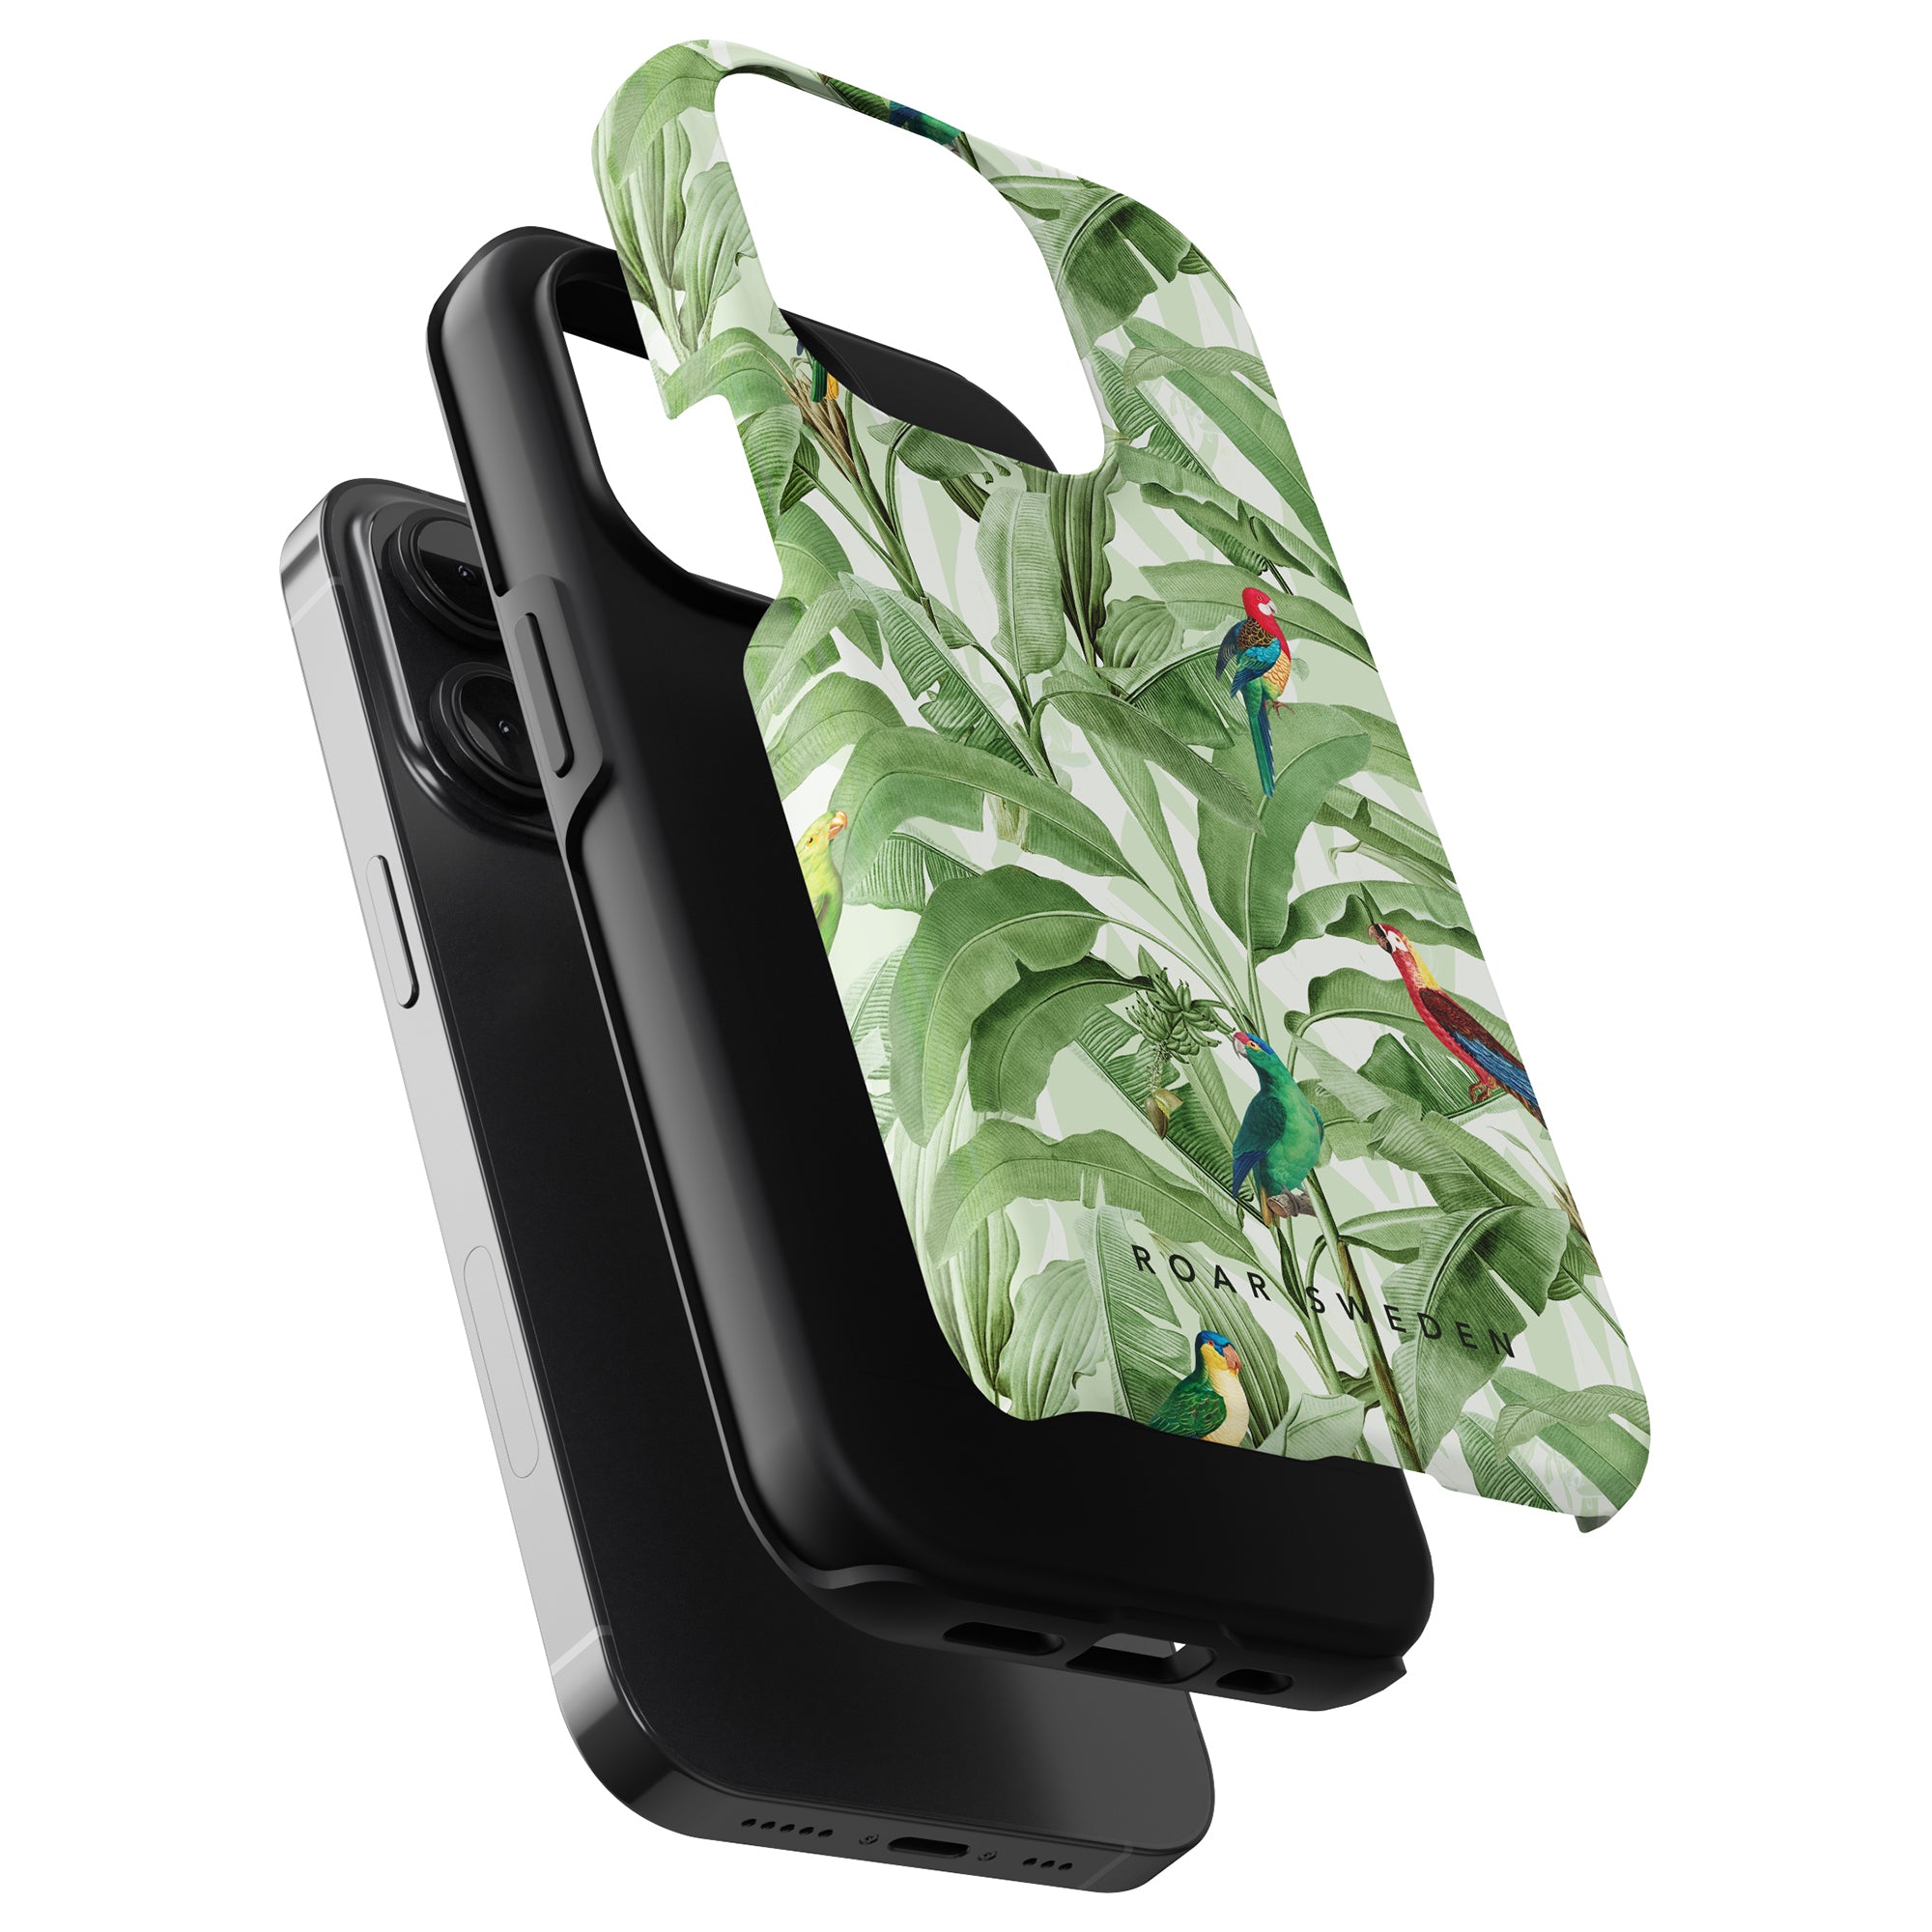 Smartphone cases from the jungle collection with tropical foliage and Parrot Paradise design, and a tough Parrot Paradise - Tough Case, positioned against a white background.